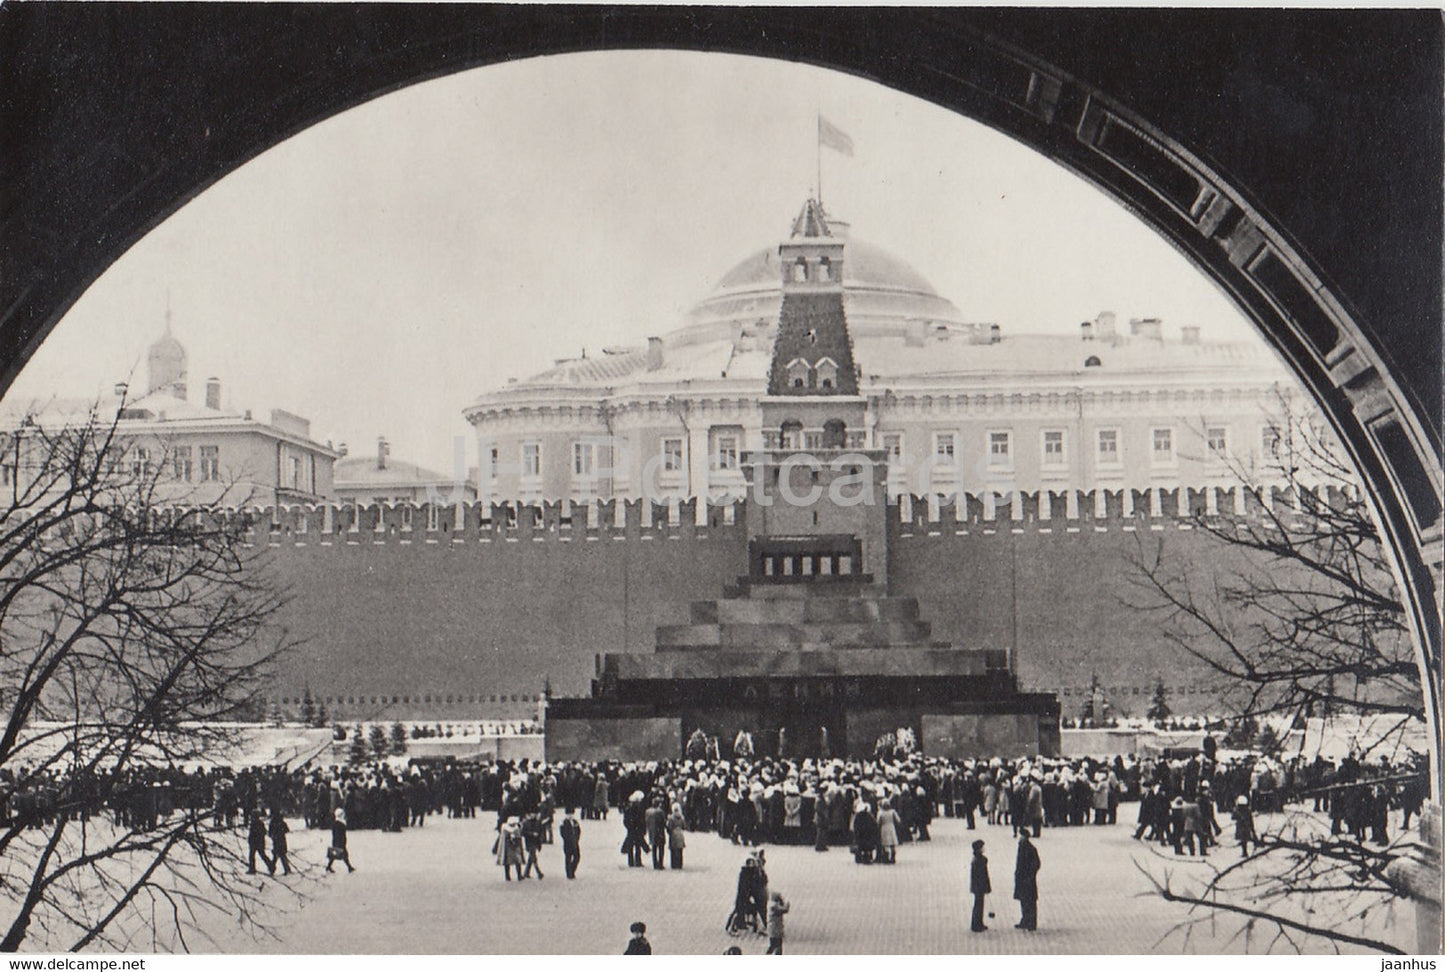 Moscow - Red Square - The Lenin Mausoleum - 1975 - Russia USSR - unused - JH Postcards